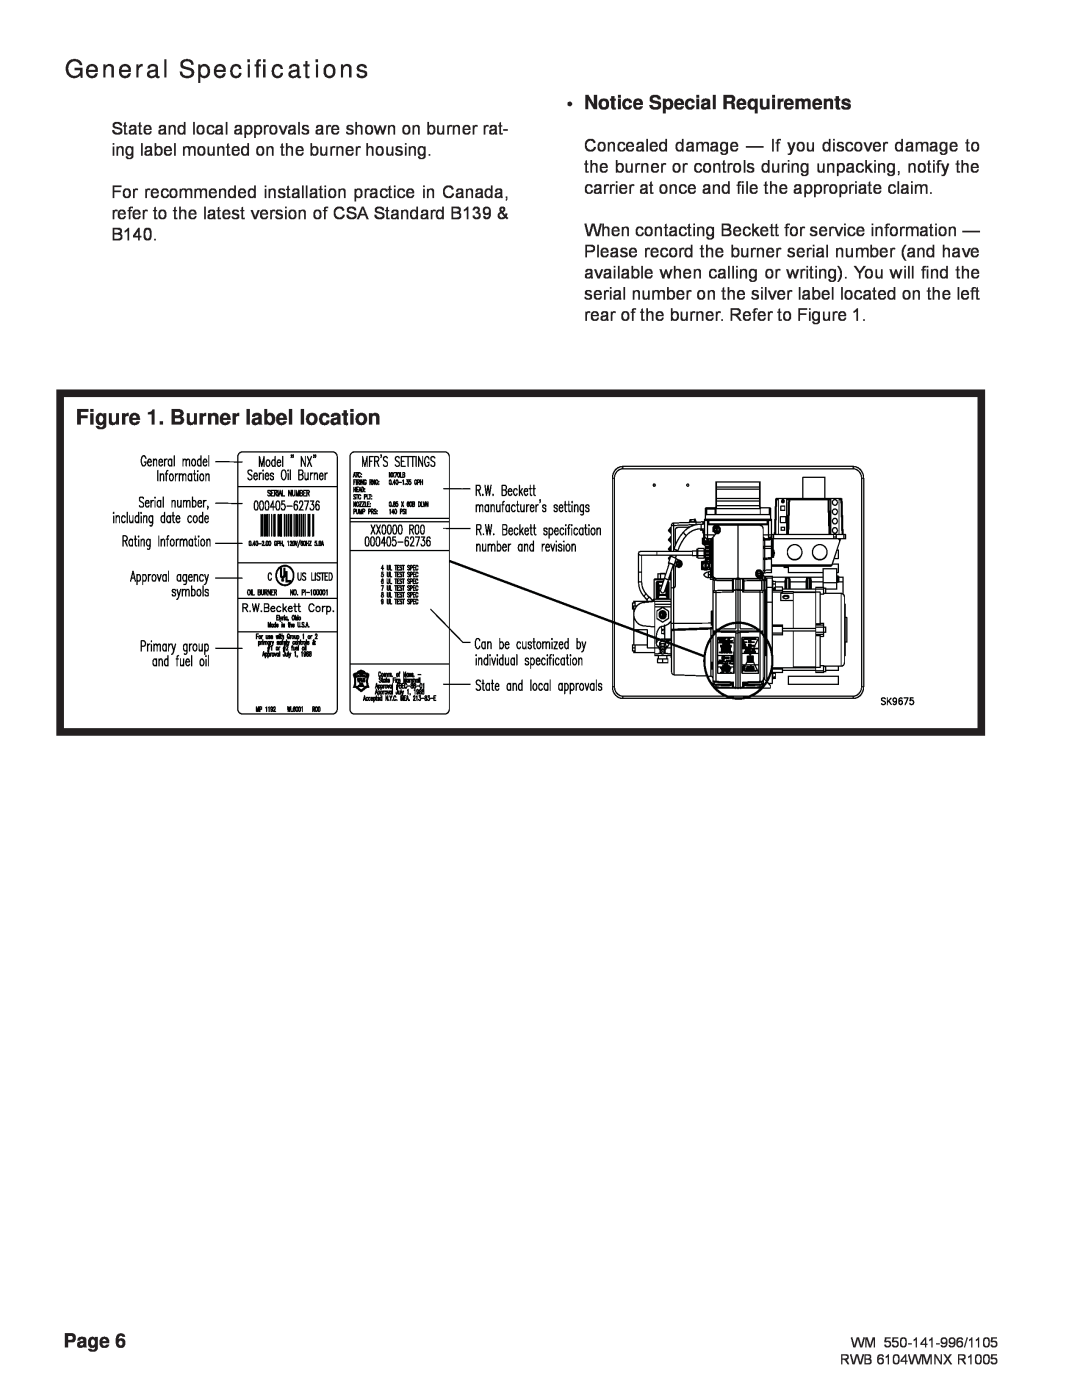 Weil-McLain NX manual Burner label location, Notice Special Requirements, General Speciﬁcations, Page 